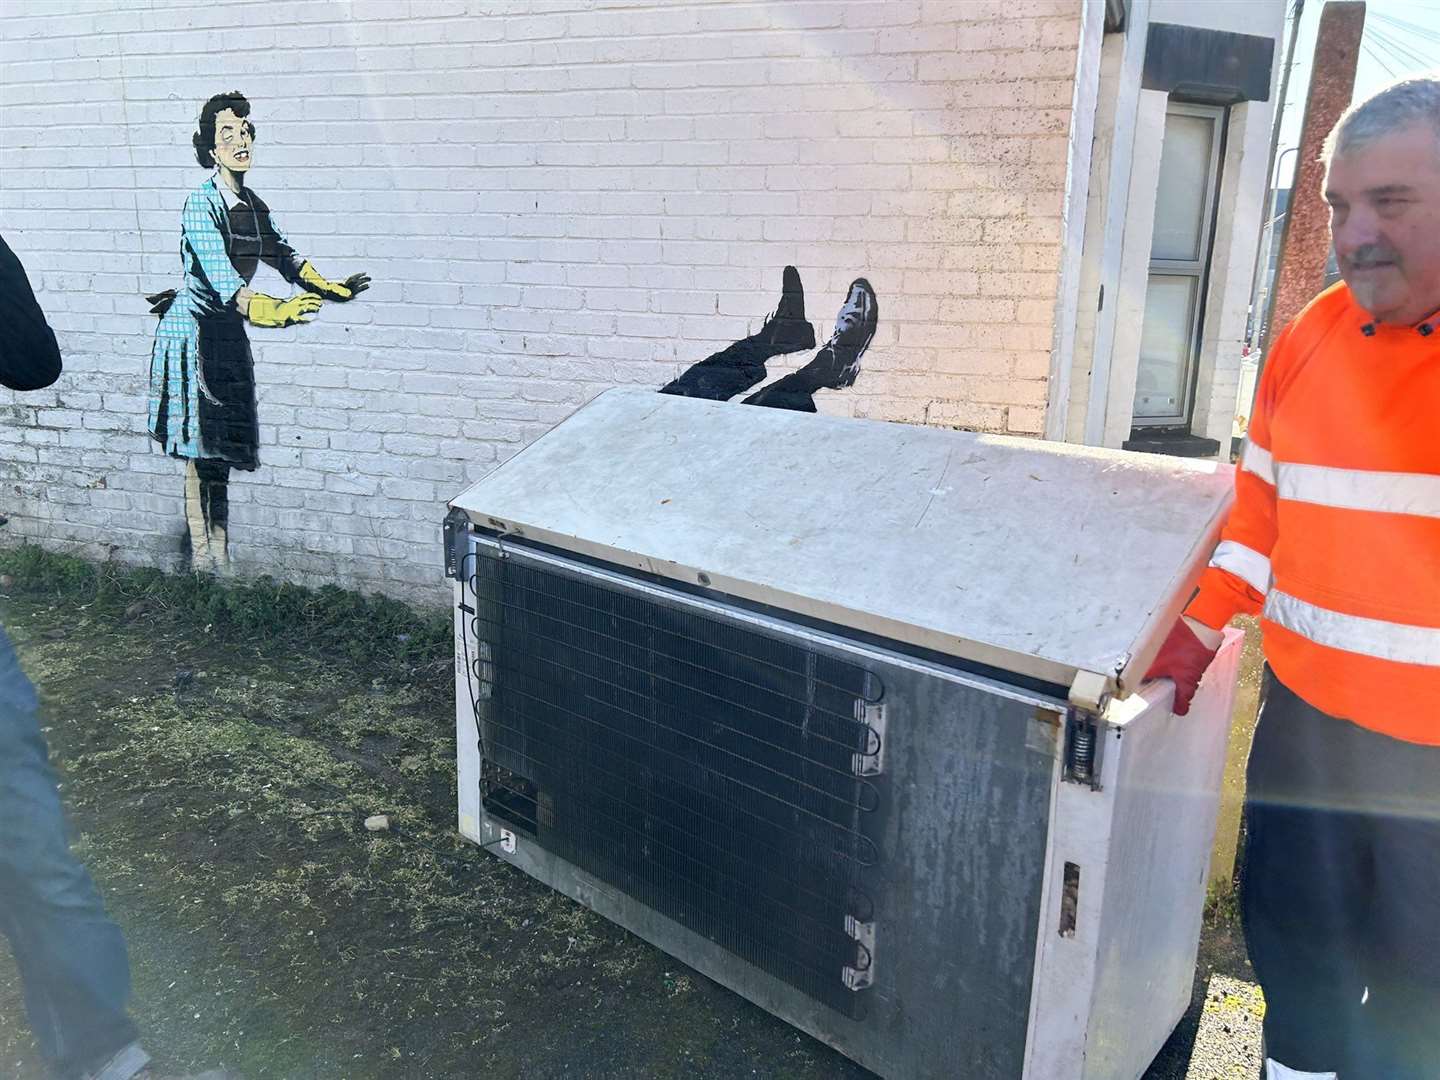 The chest freezer being removed from the Banksy artwork in Margate. Picture: Dan Bambridge-Higgins